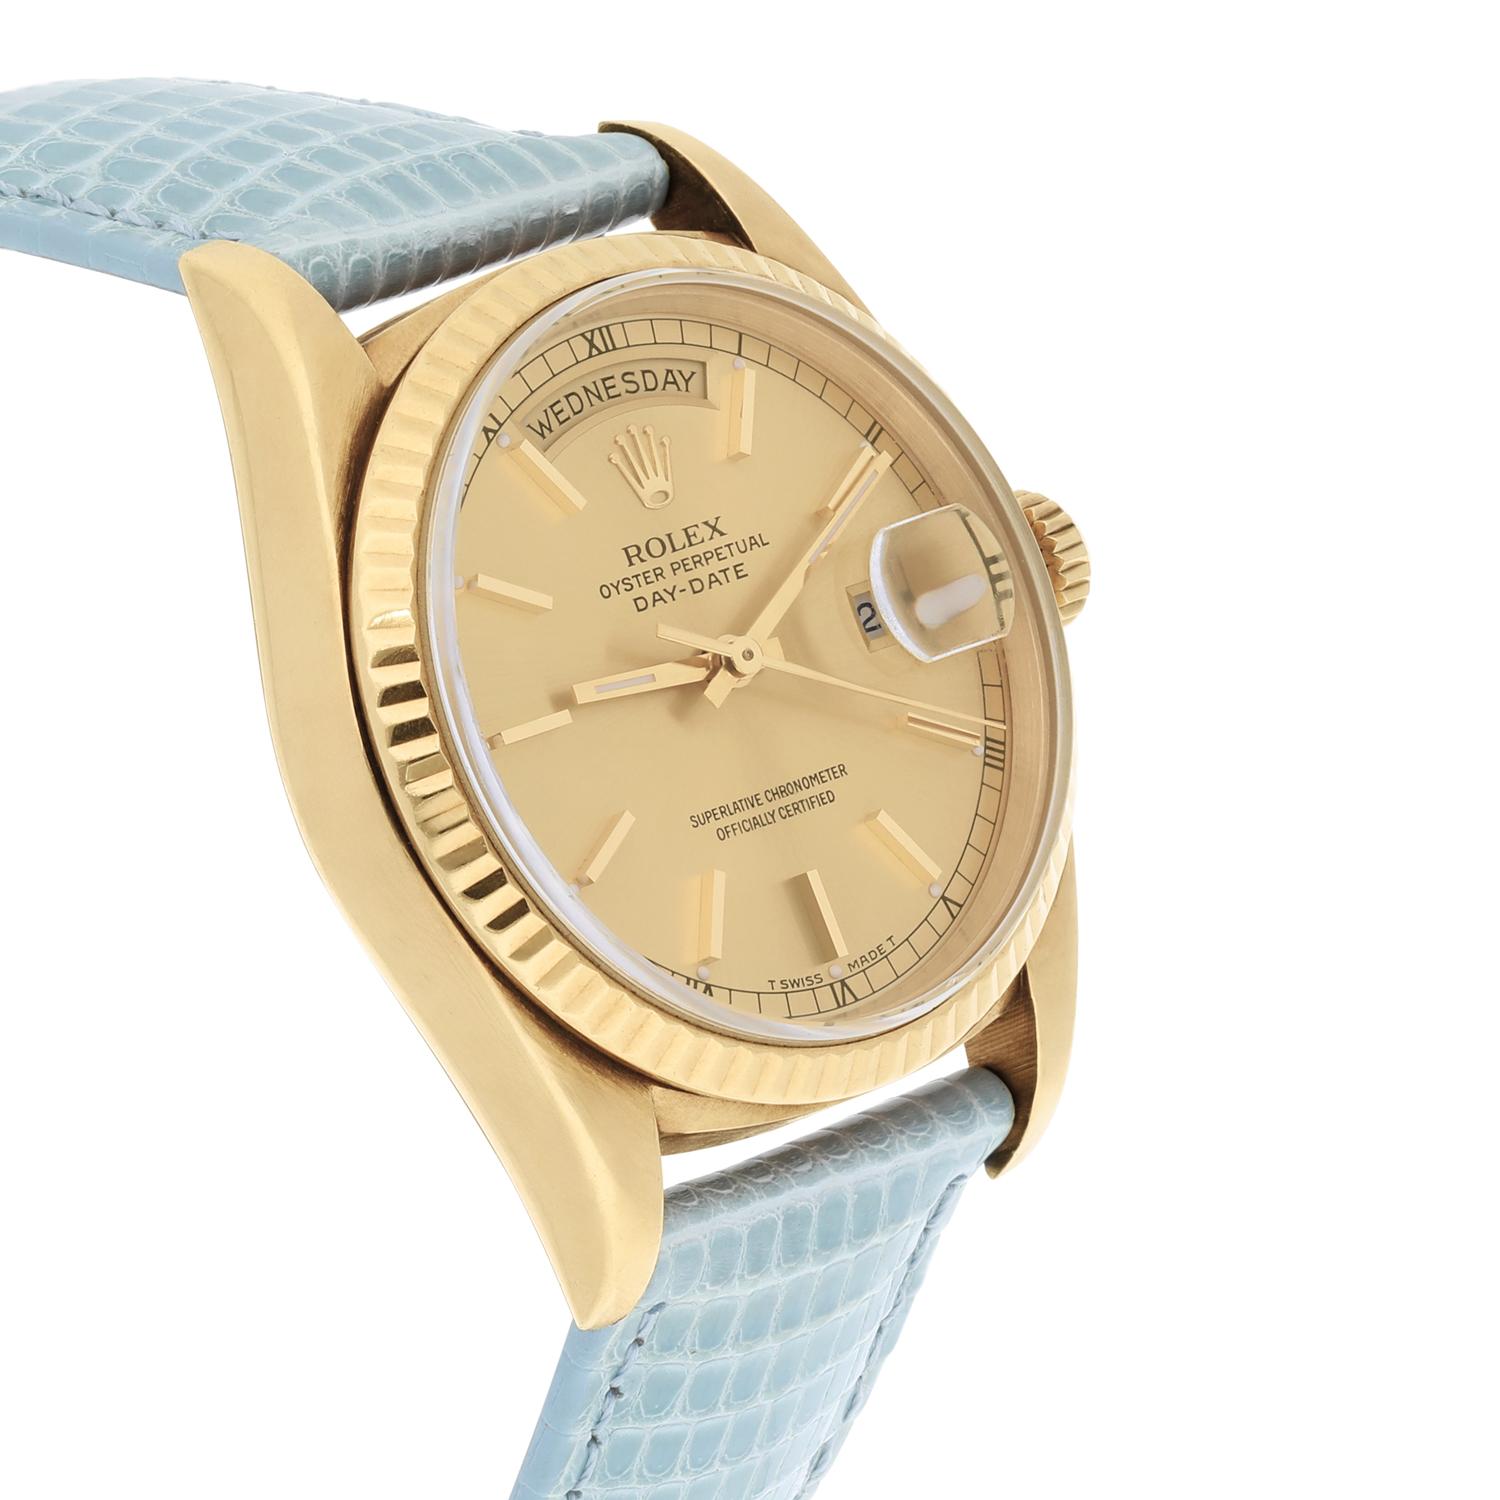 Rolex Day-Date 18238 36mm 18K Yellow Gold Watch Fluted Bezel Champagne Dial For Sale 1